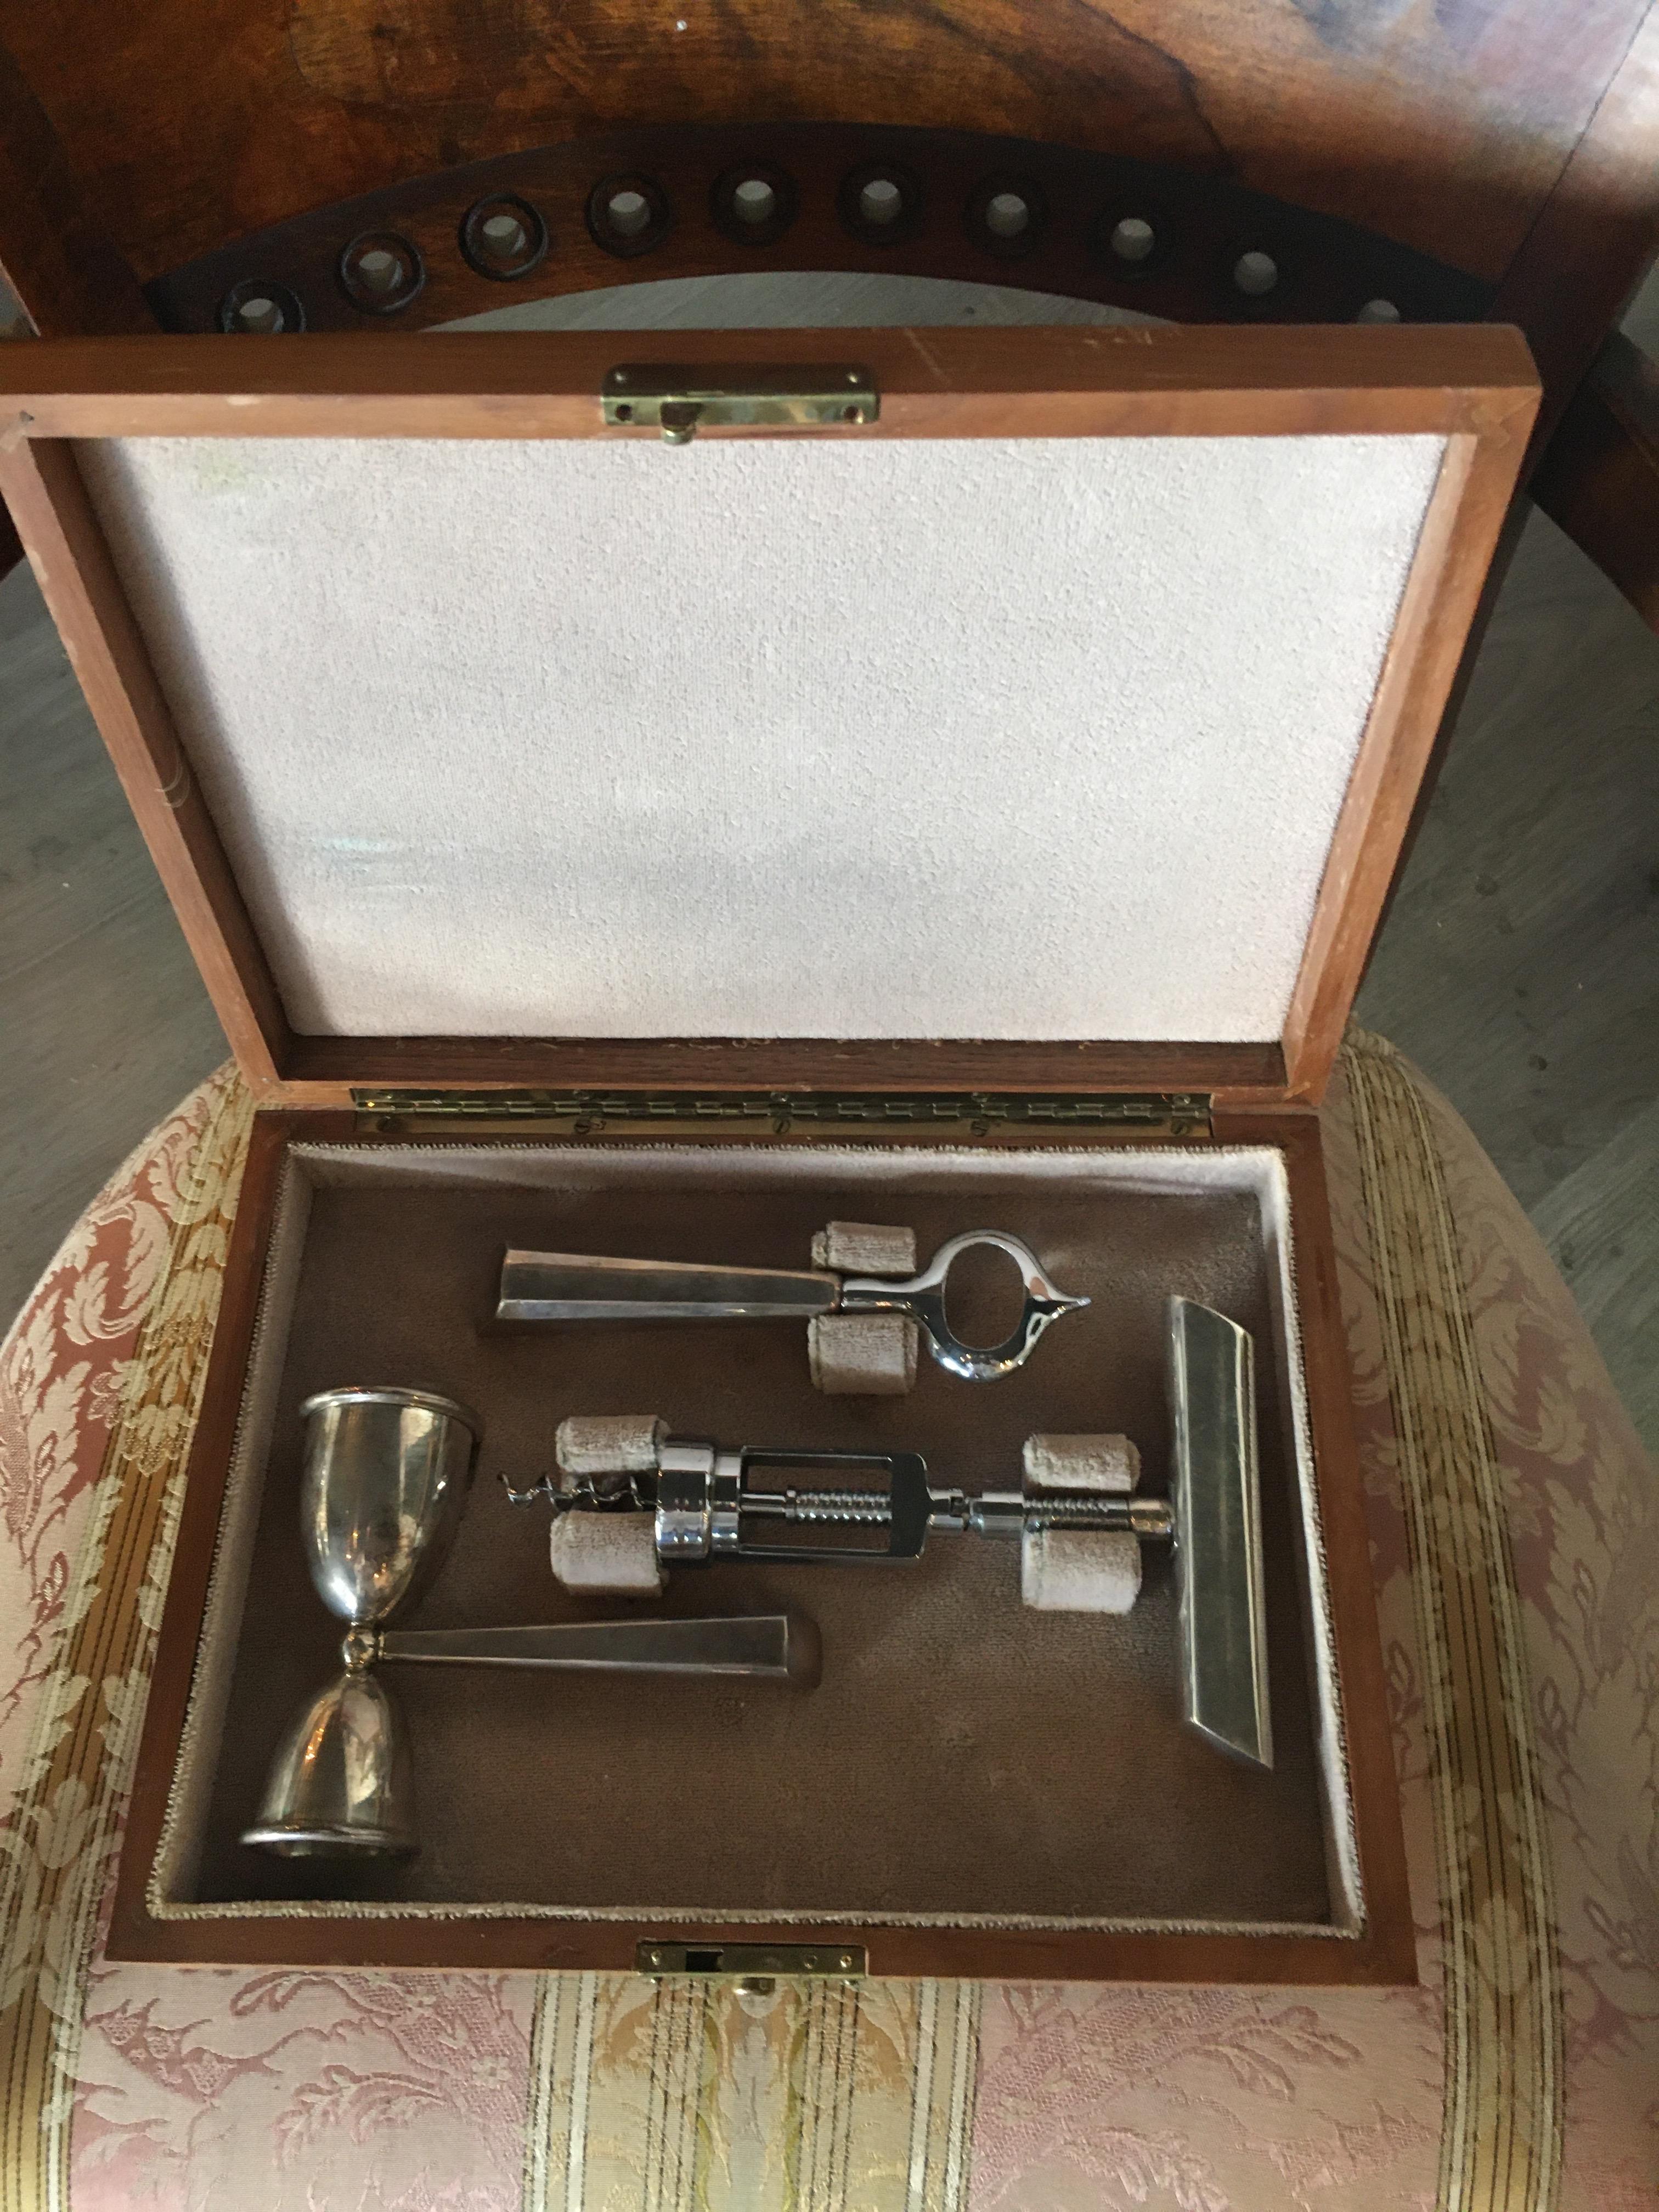 An exceptional Art Deco sterling silver bar set manufactured by New York silversmith John Hasselbring.  The fitted walnut case includes a six piece set comprised of includes corkscrew, bottle opener, spirit measure, all marked sterling. 

Circa